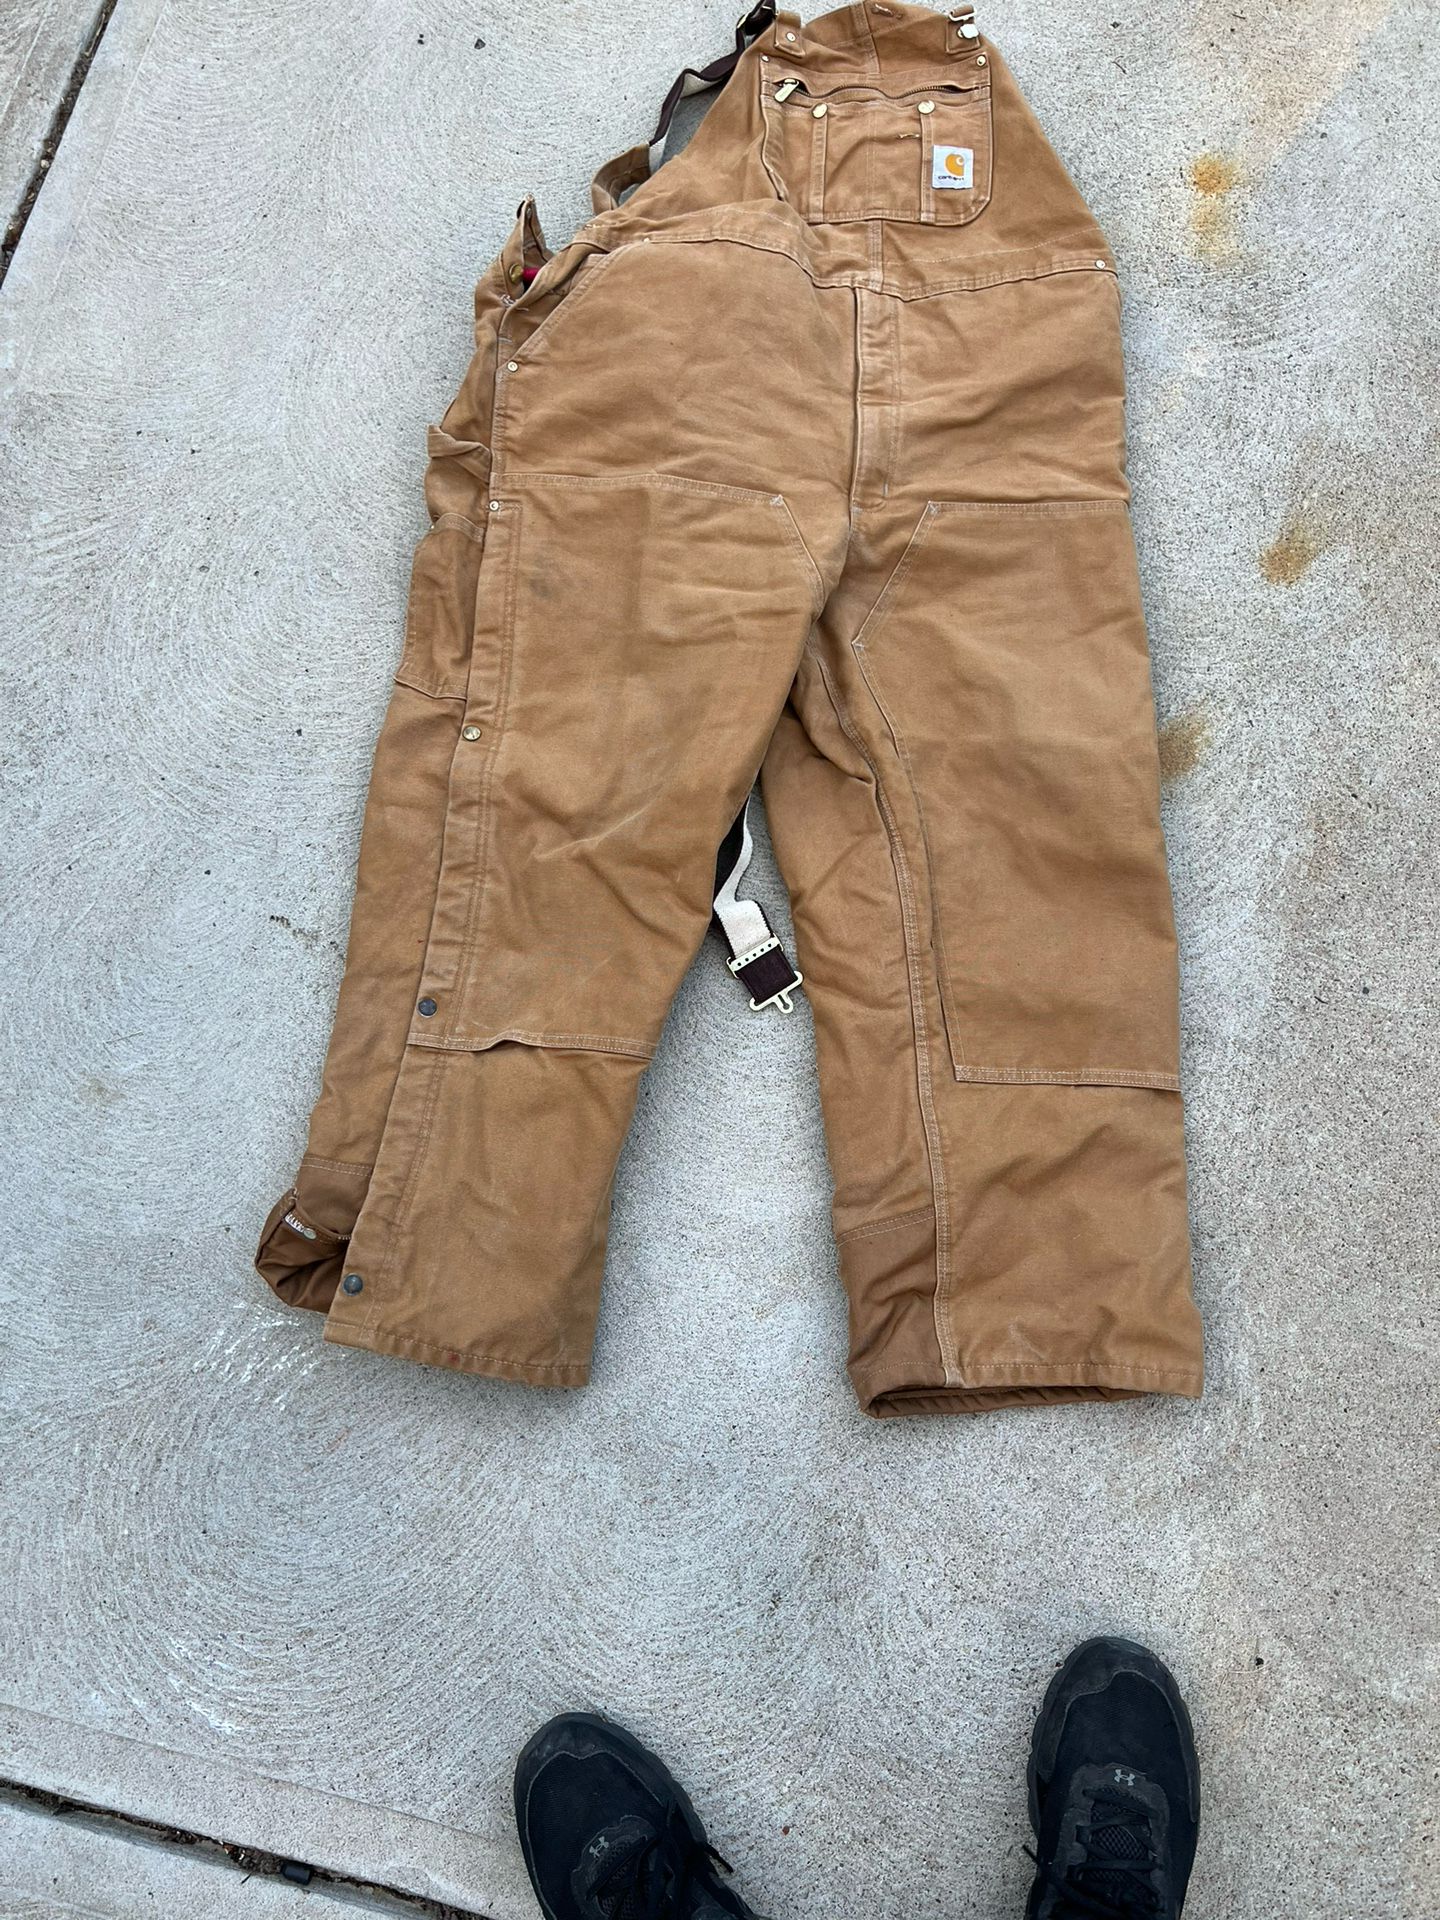 Carhartt Lined Overalls - Red Quilted Bibs - Workwear - Canvas pants - Duck Canvas - Men’s Distressed  . Size 50x30 